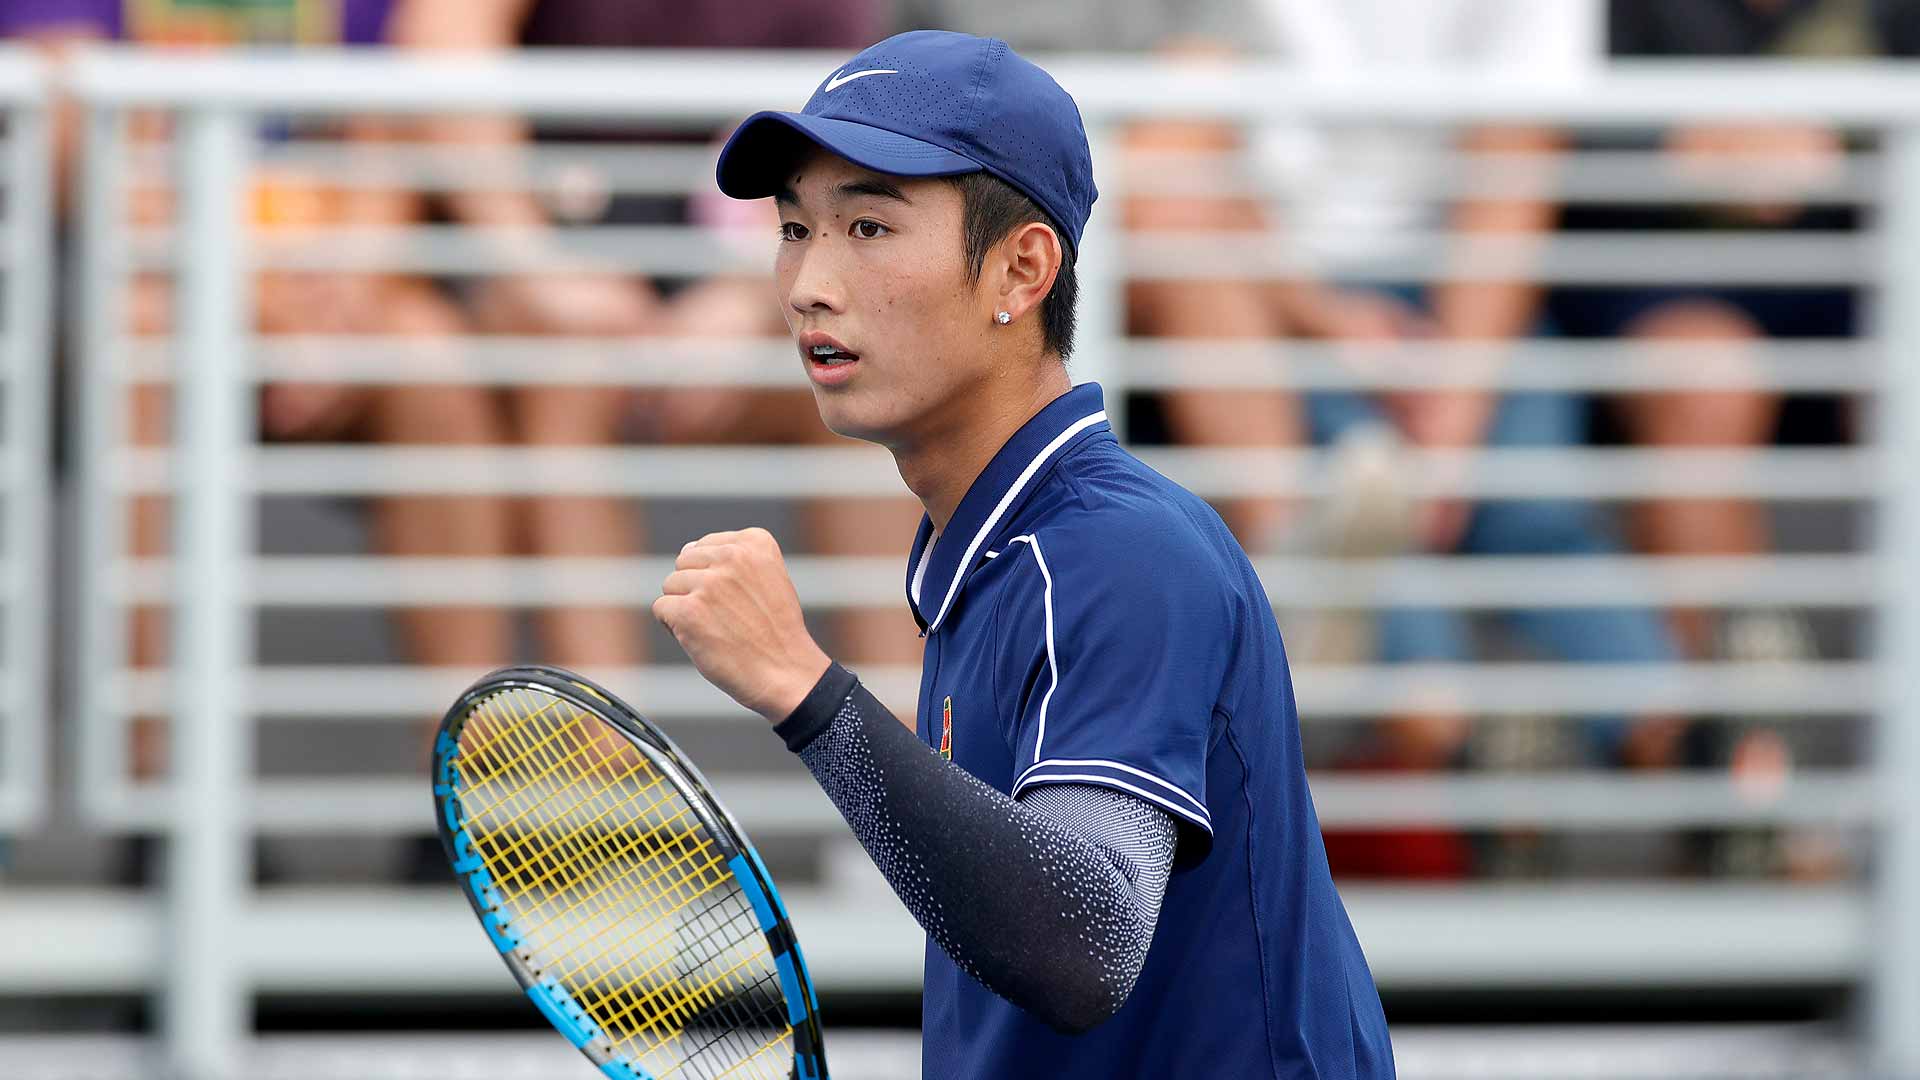 Shang Juncheng is No. 194 in the Pepperstone ATP Rankings.